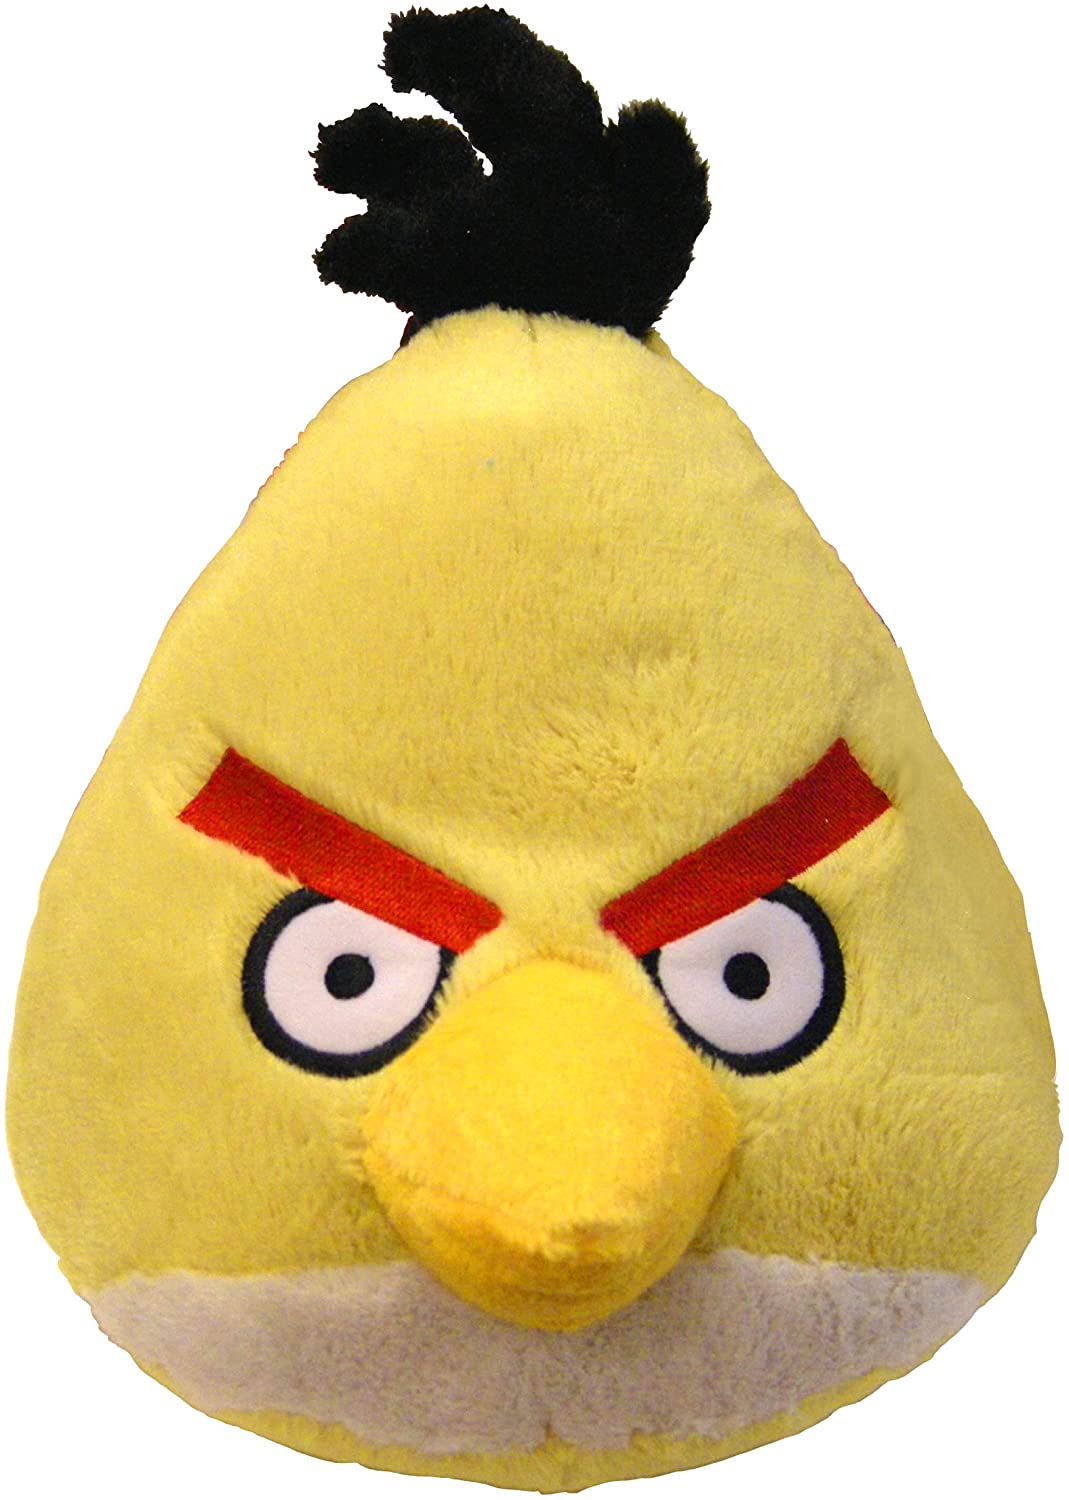 angry bird toys online